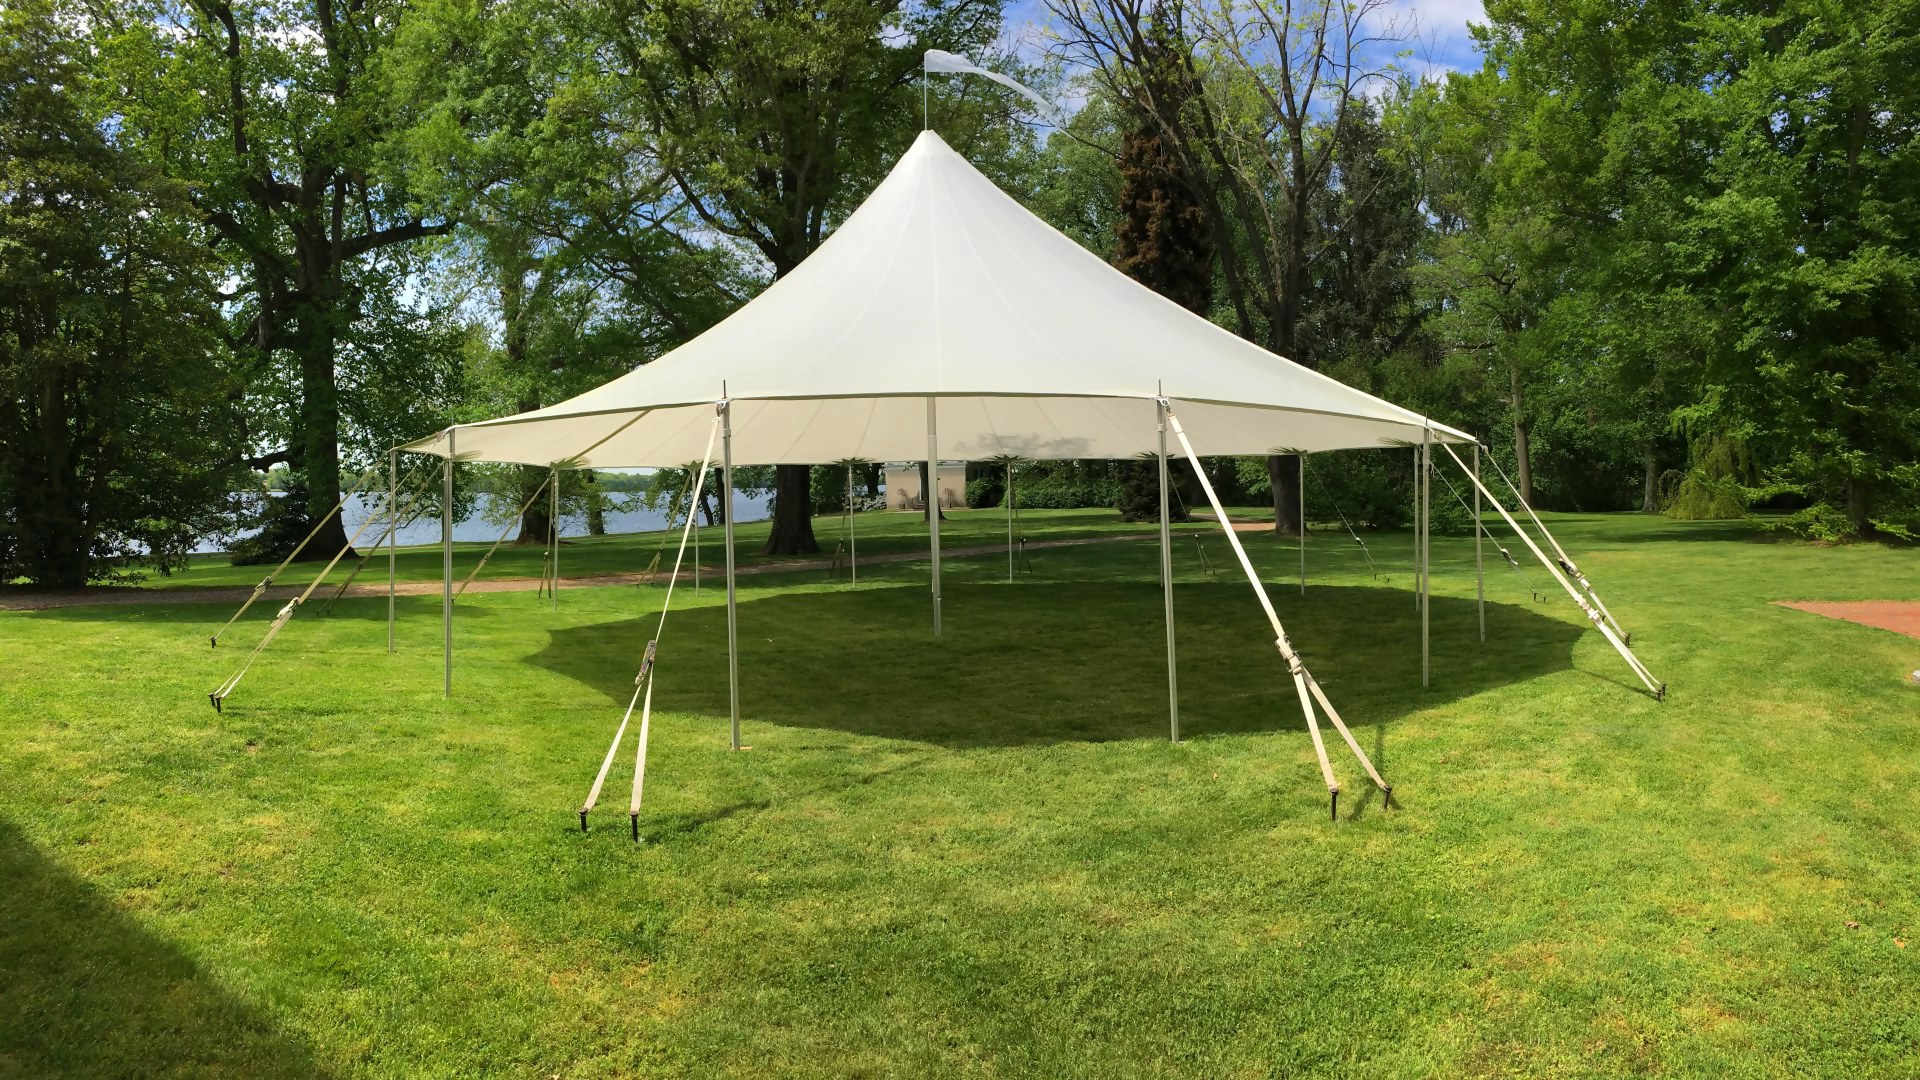 Beautiful sailcloth tent for rent in Coatesville, PA